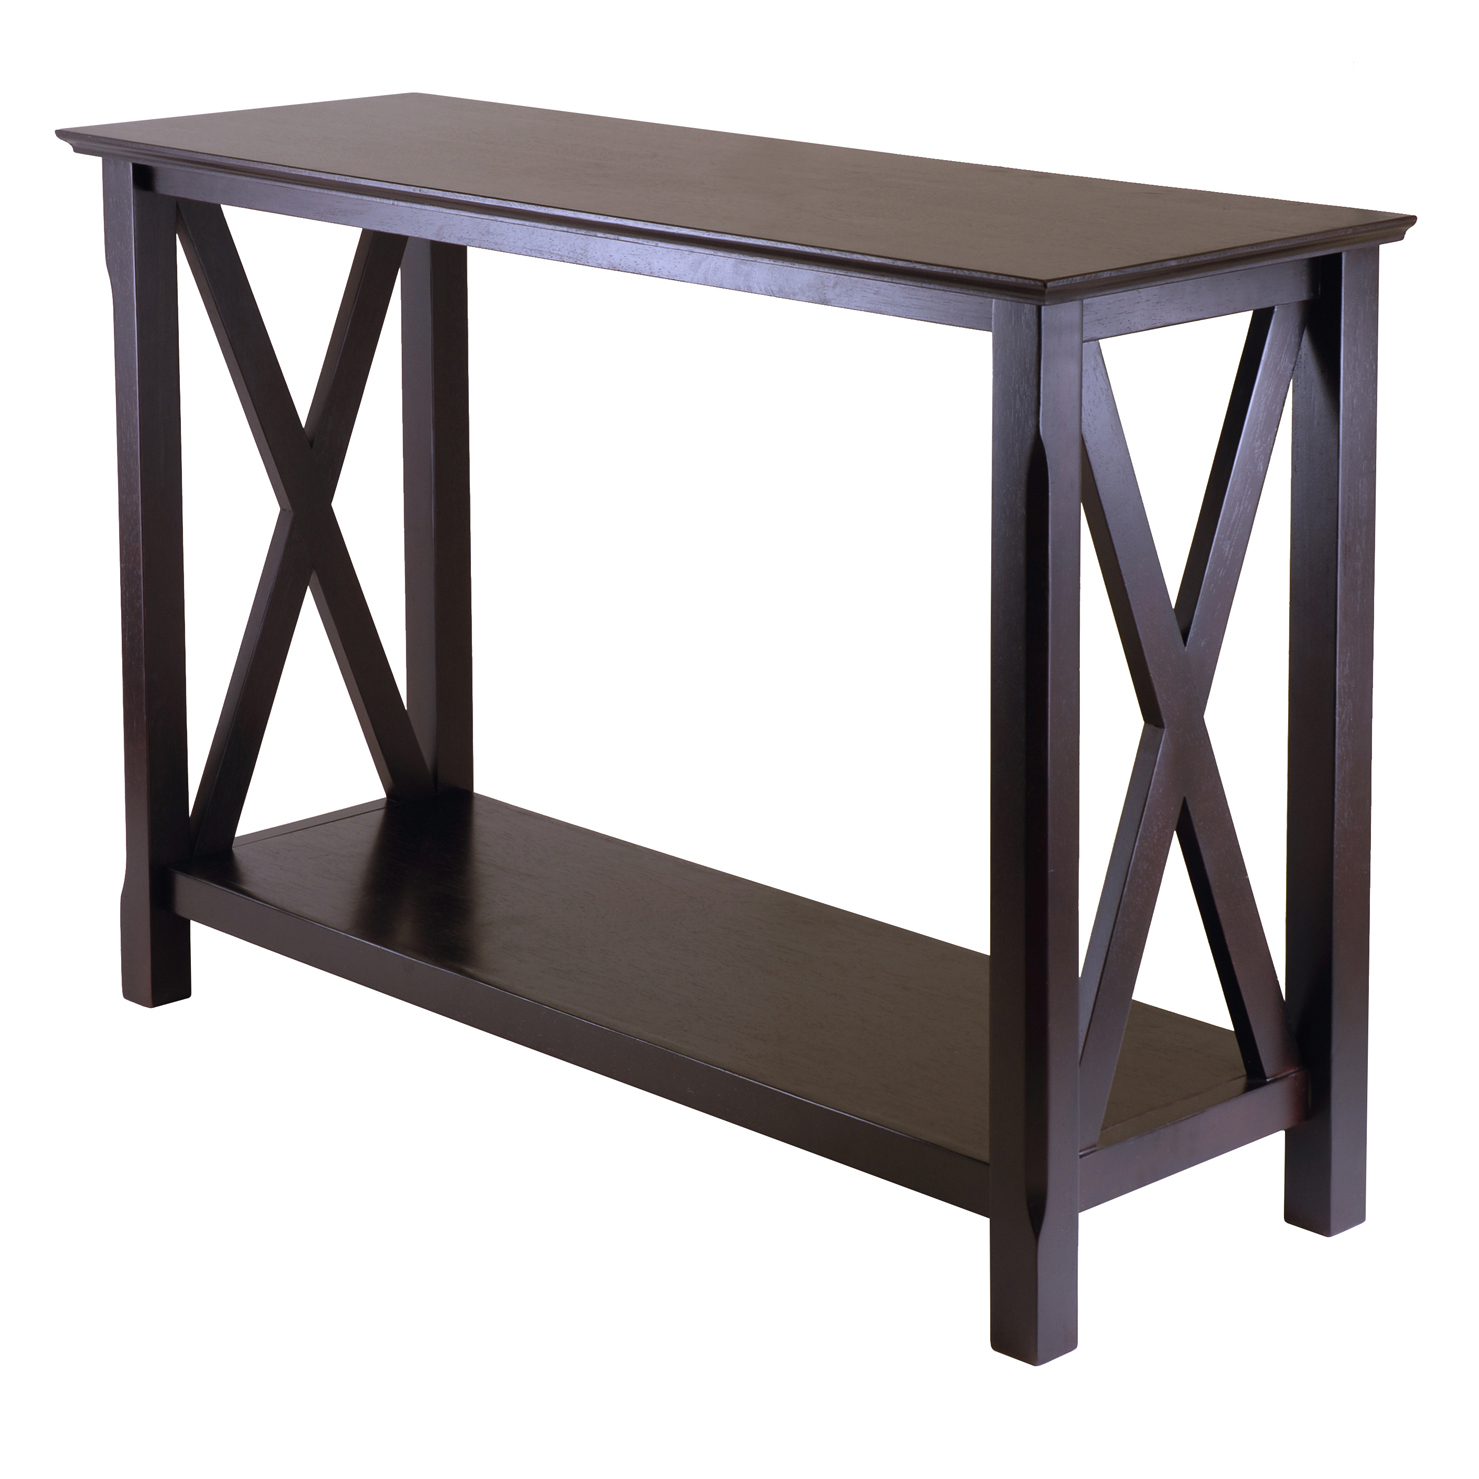 Winsome Wood Xola X-Panel Console Table, Cappuccino Finish - image 1 of 5